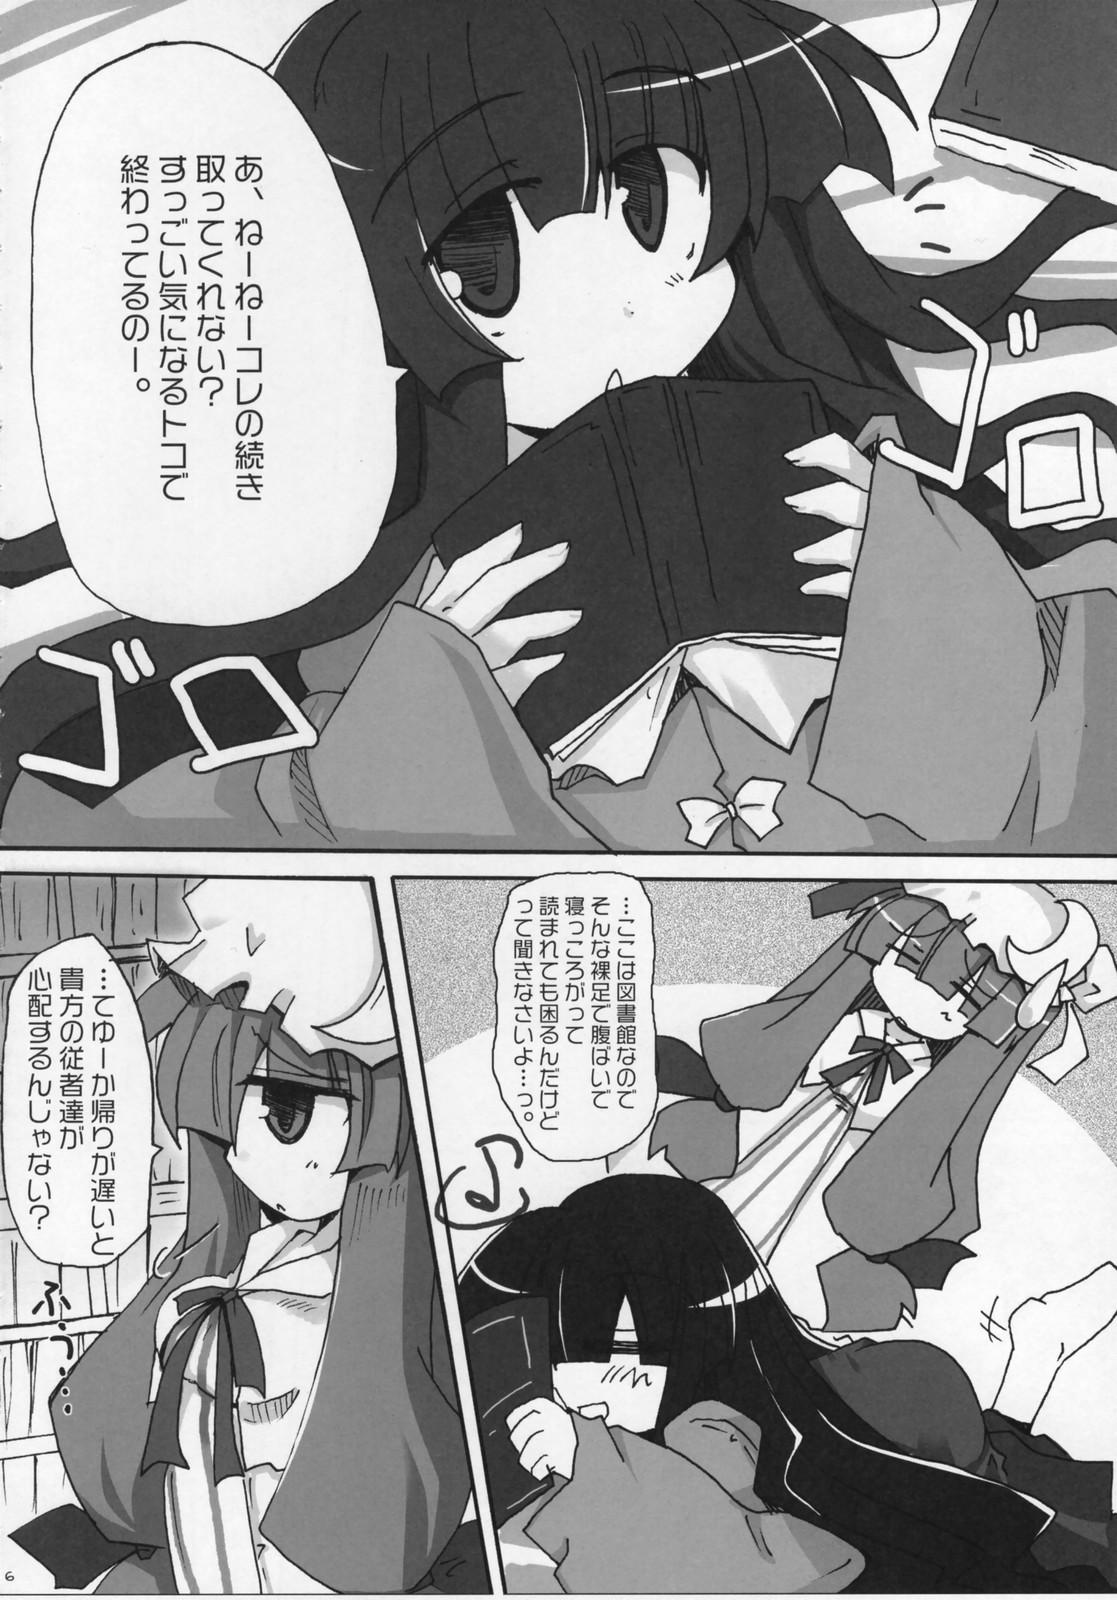 Euro [Oppai-Bloomer!] Love-chuchu-GOGO-2! (Touhou Project) - Touhou project Squirters - Page 5